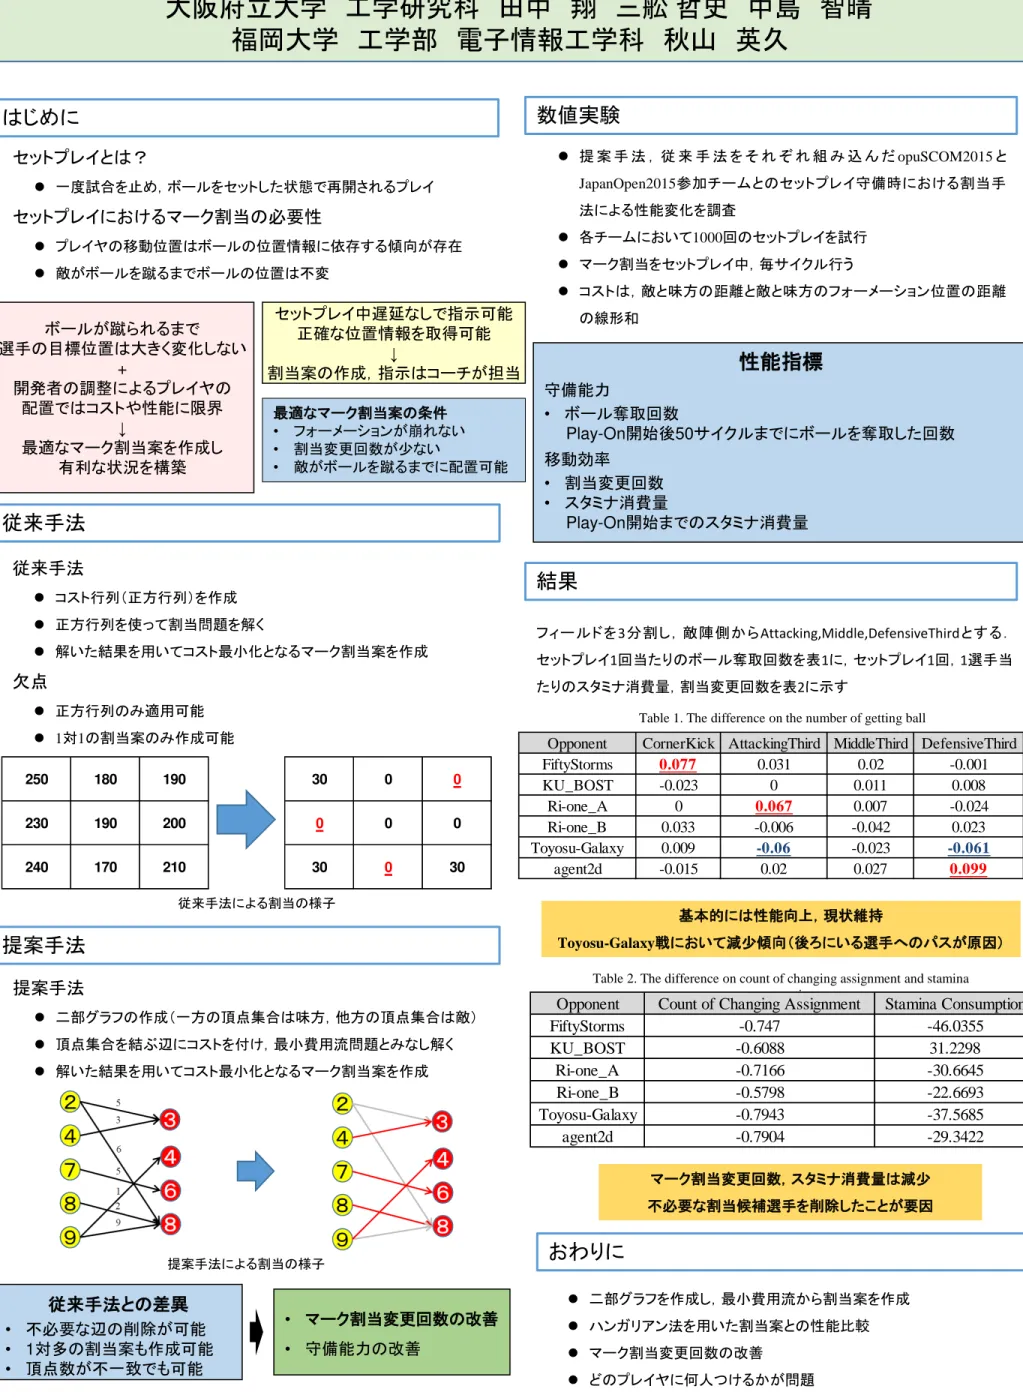 Table 2. The difference on count of changing assignment and stamina  consumption  ー 割当変更回数，スタ 消費量 減少 不必要 割当候補選手 削 こ 要因  二部 フ 作成 ，最小費用流 割当案 作成  ハンガ ン法 用い 割当案 性能比較  ー 割当変更回数 改善  プ ヤ 何人 け 問題わ基本的性能向 ，現状維持Toyosu-Galaxy戦い減少傾向後い 選手へ パス 原因結果